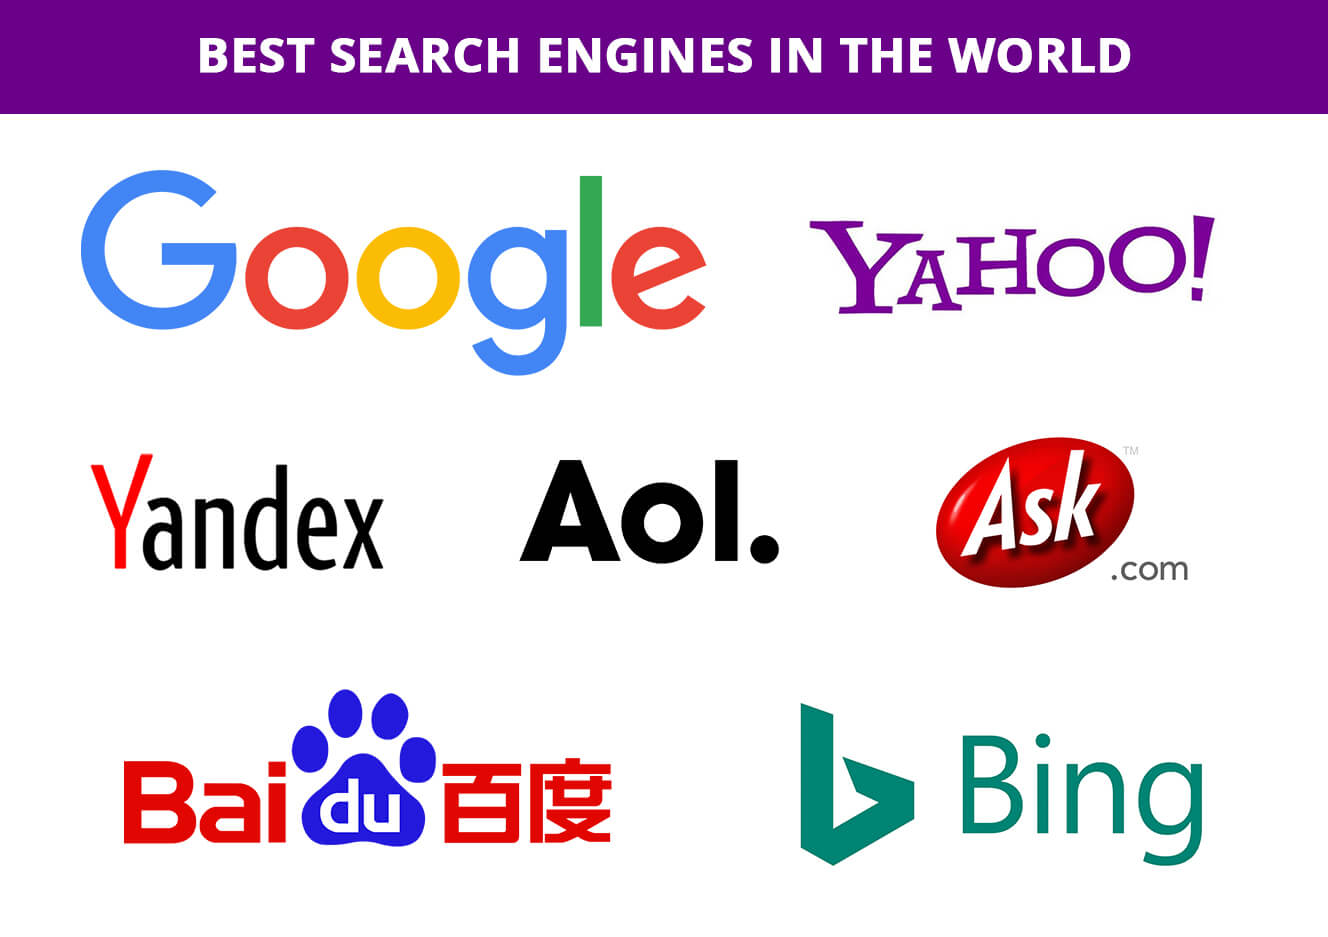 best search engine